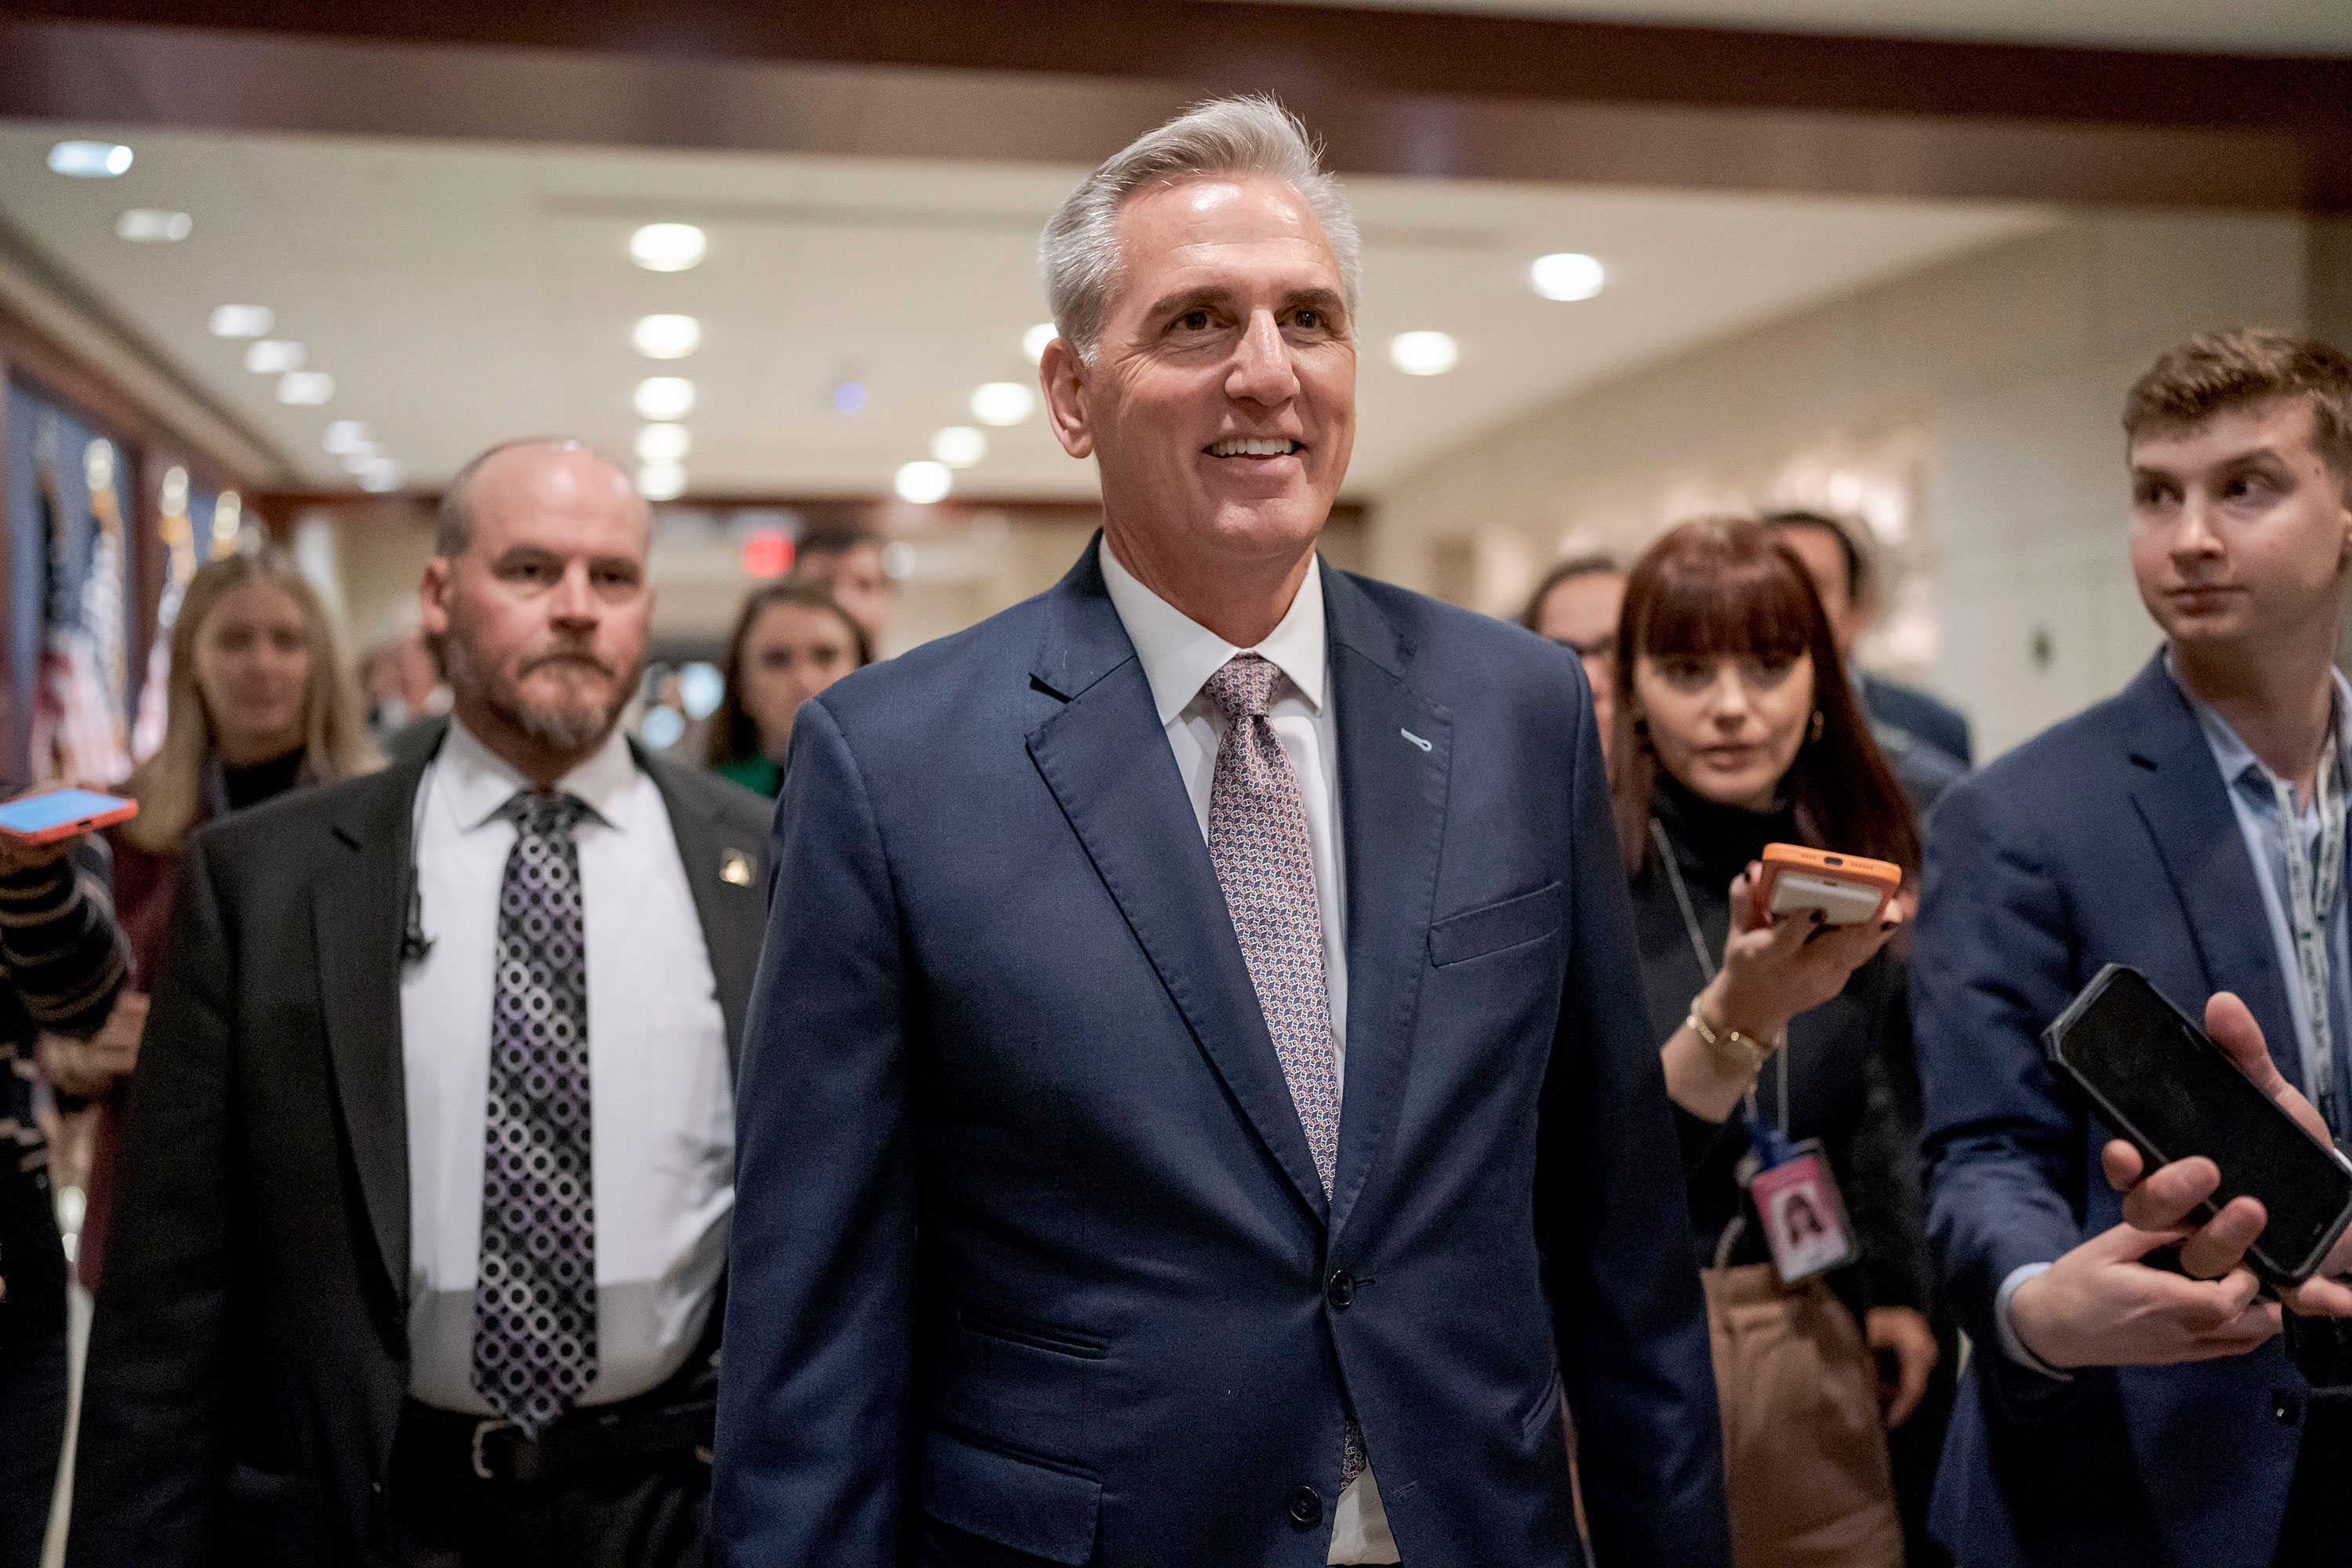 Rep. Kevin McCarthy arrives as Republicans hold their leadership candidate forum at the Capitol in Washington, DC, on Monday.